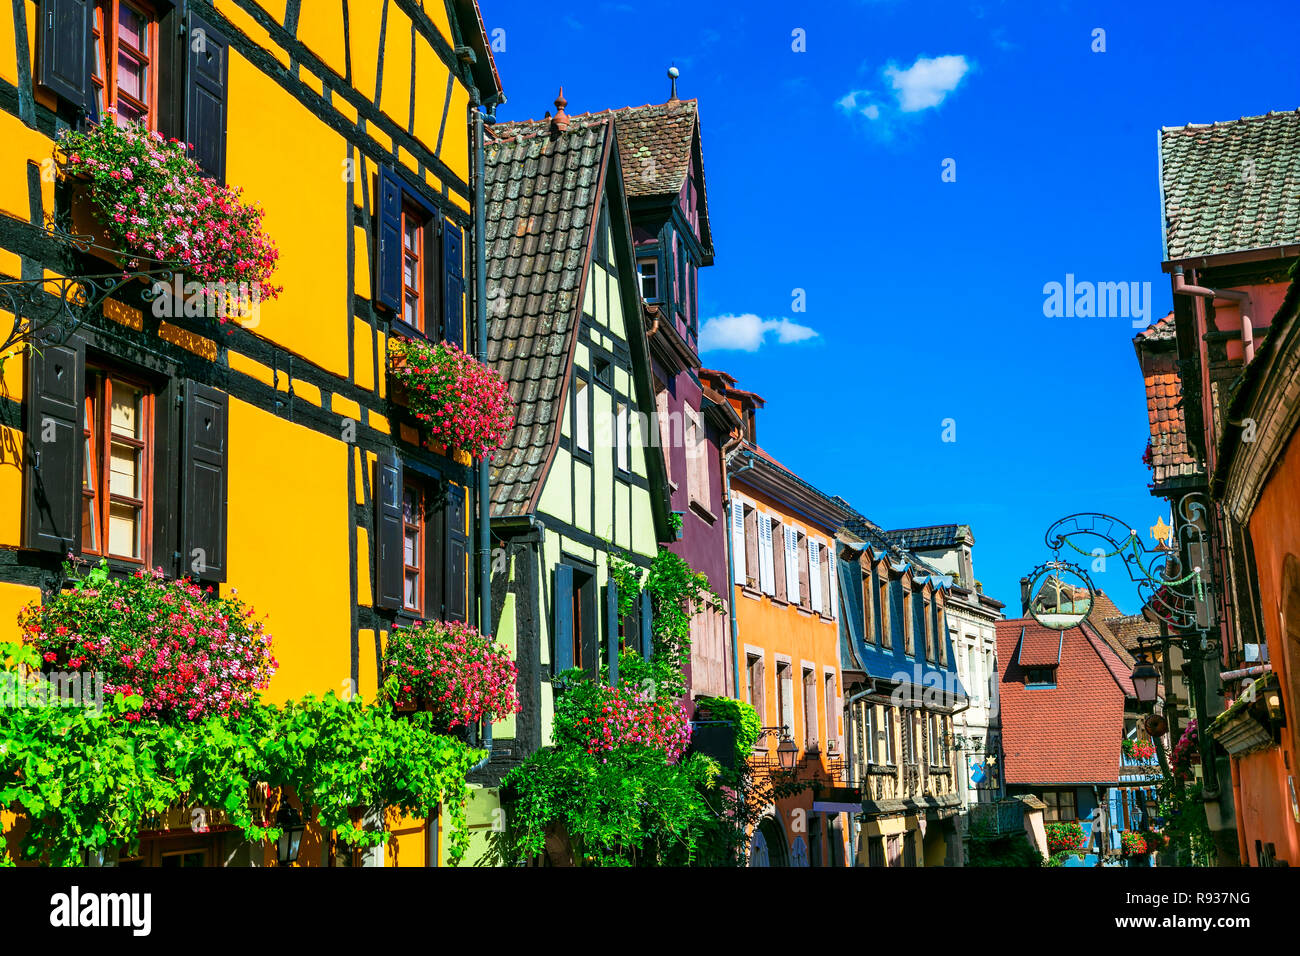 Traditional colorful houses in Riquewihr village,Alsace,France. Stock Photo